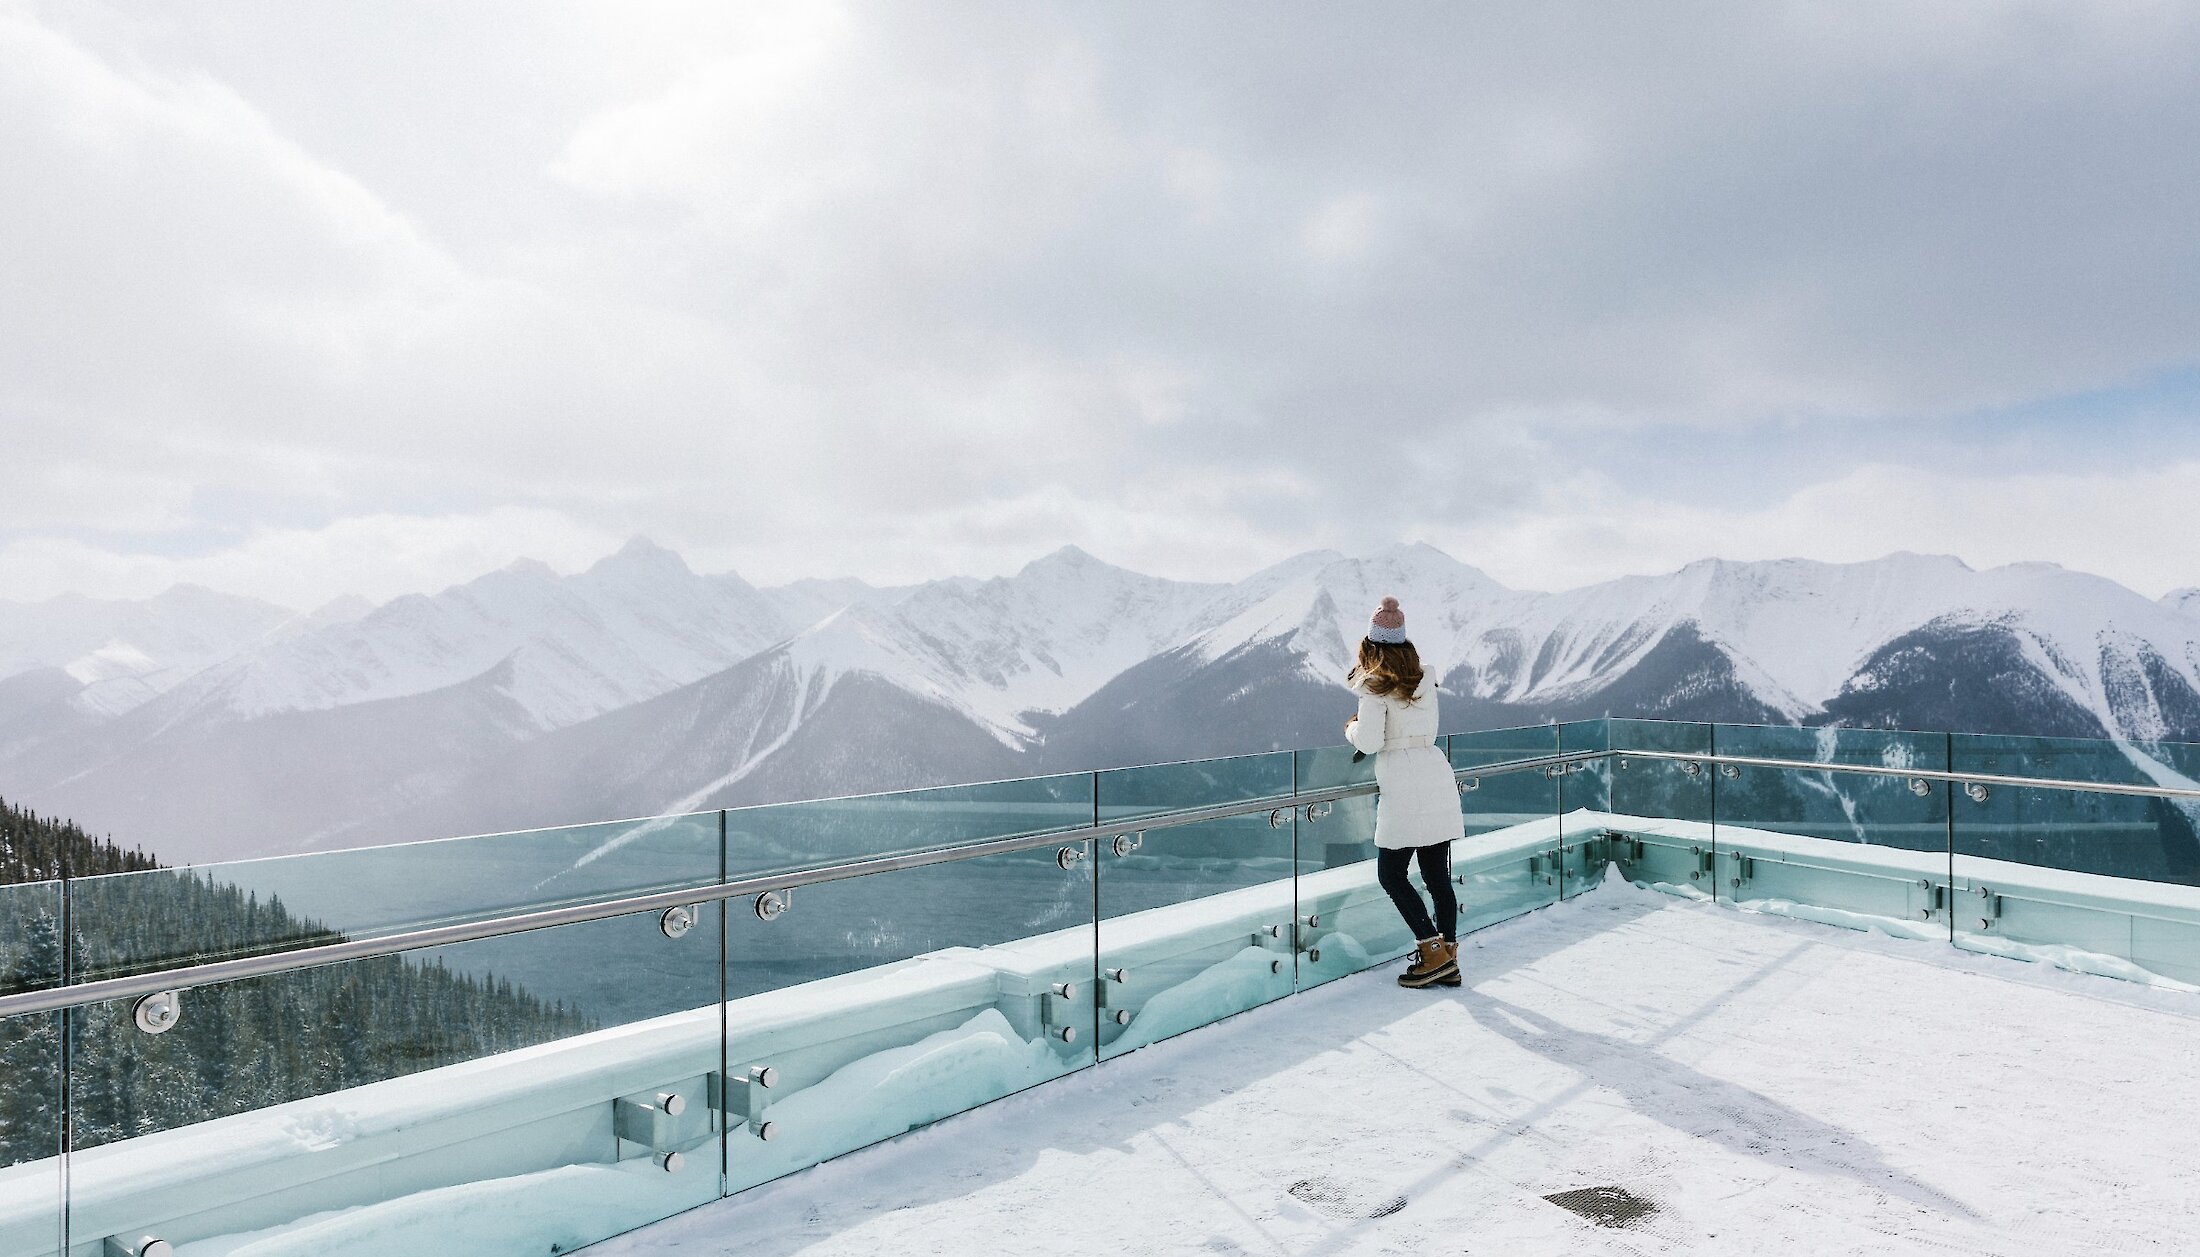 A lady staring at the panoramic view of the mountains from the top of the Banff Gondola on Sulphur Mountain